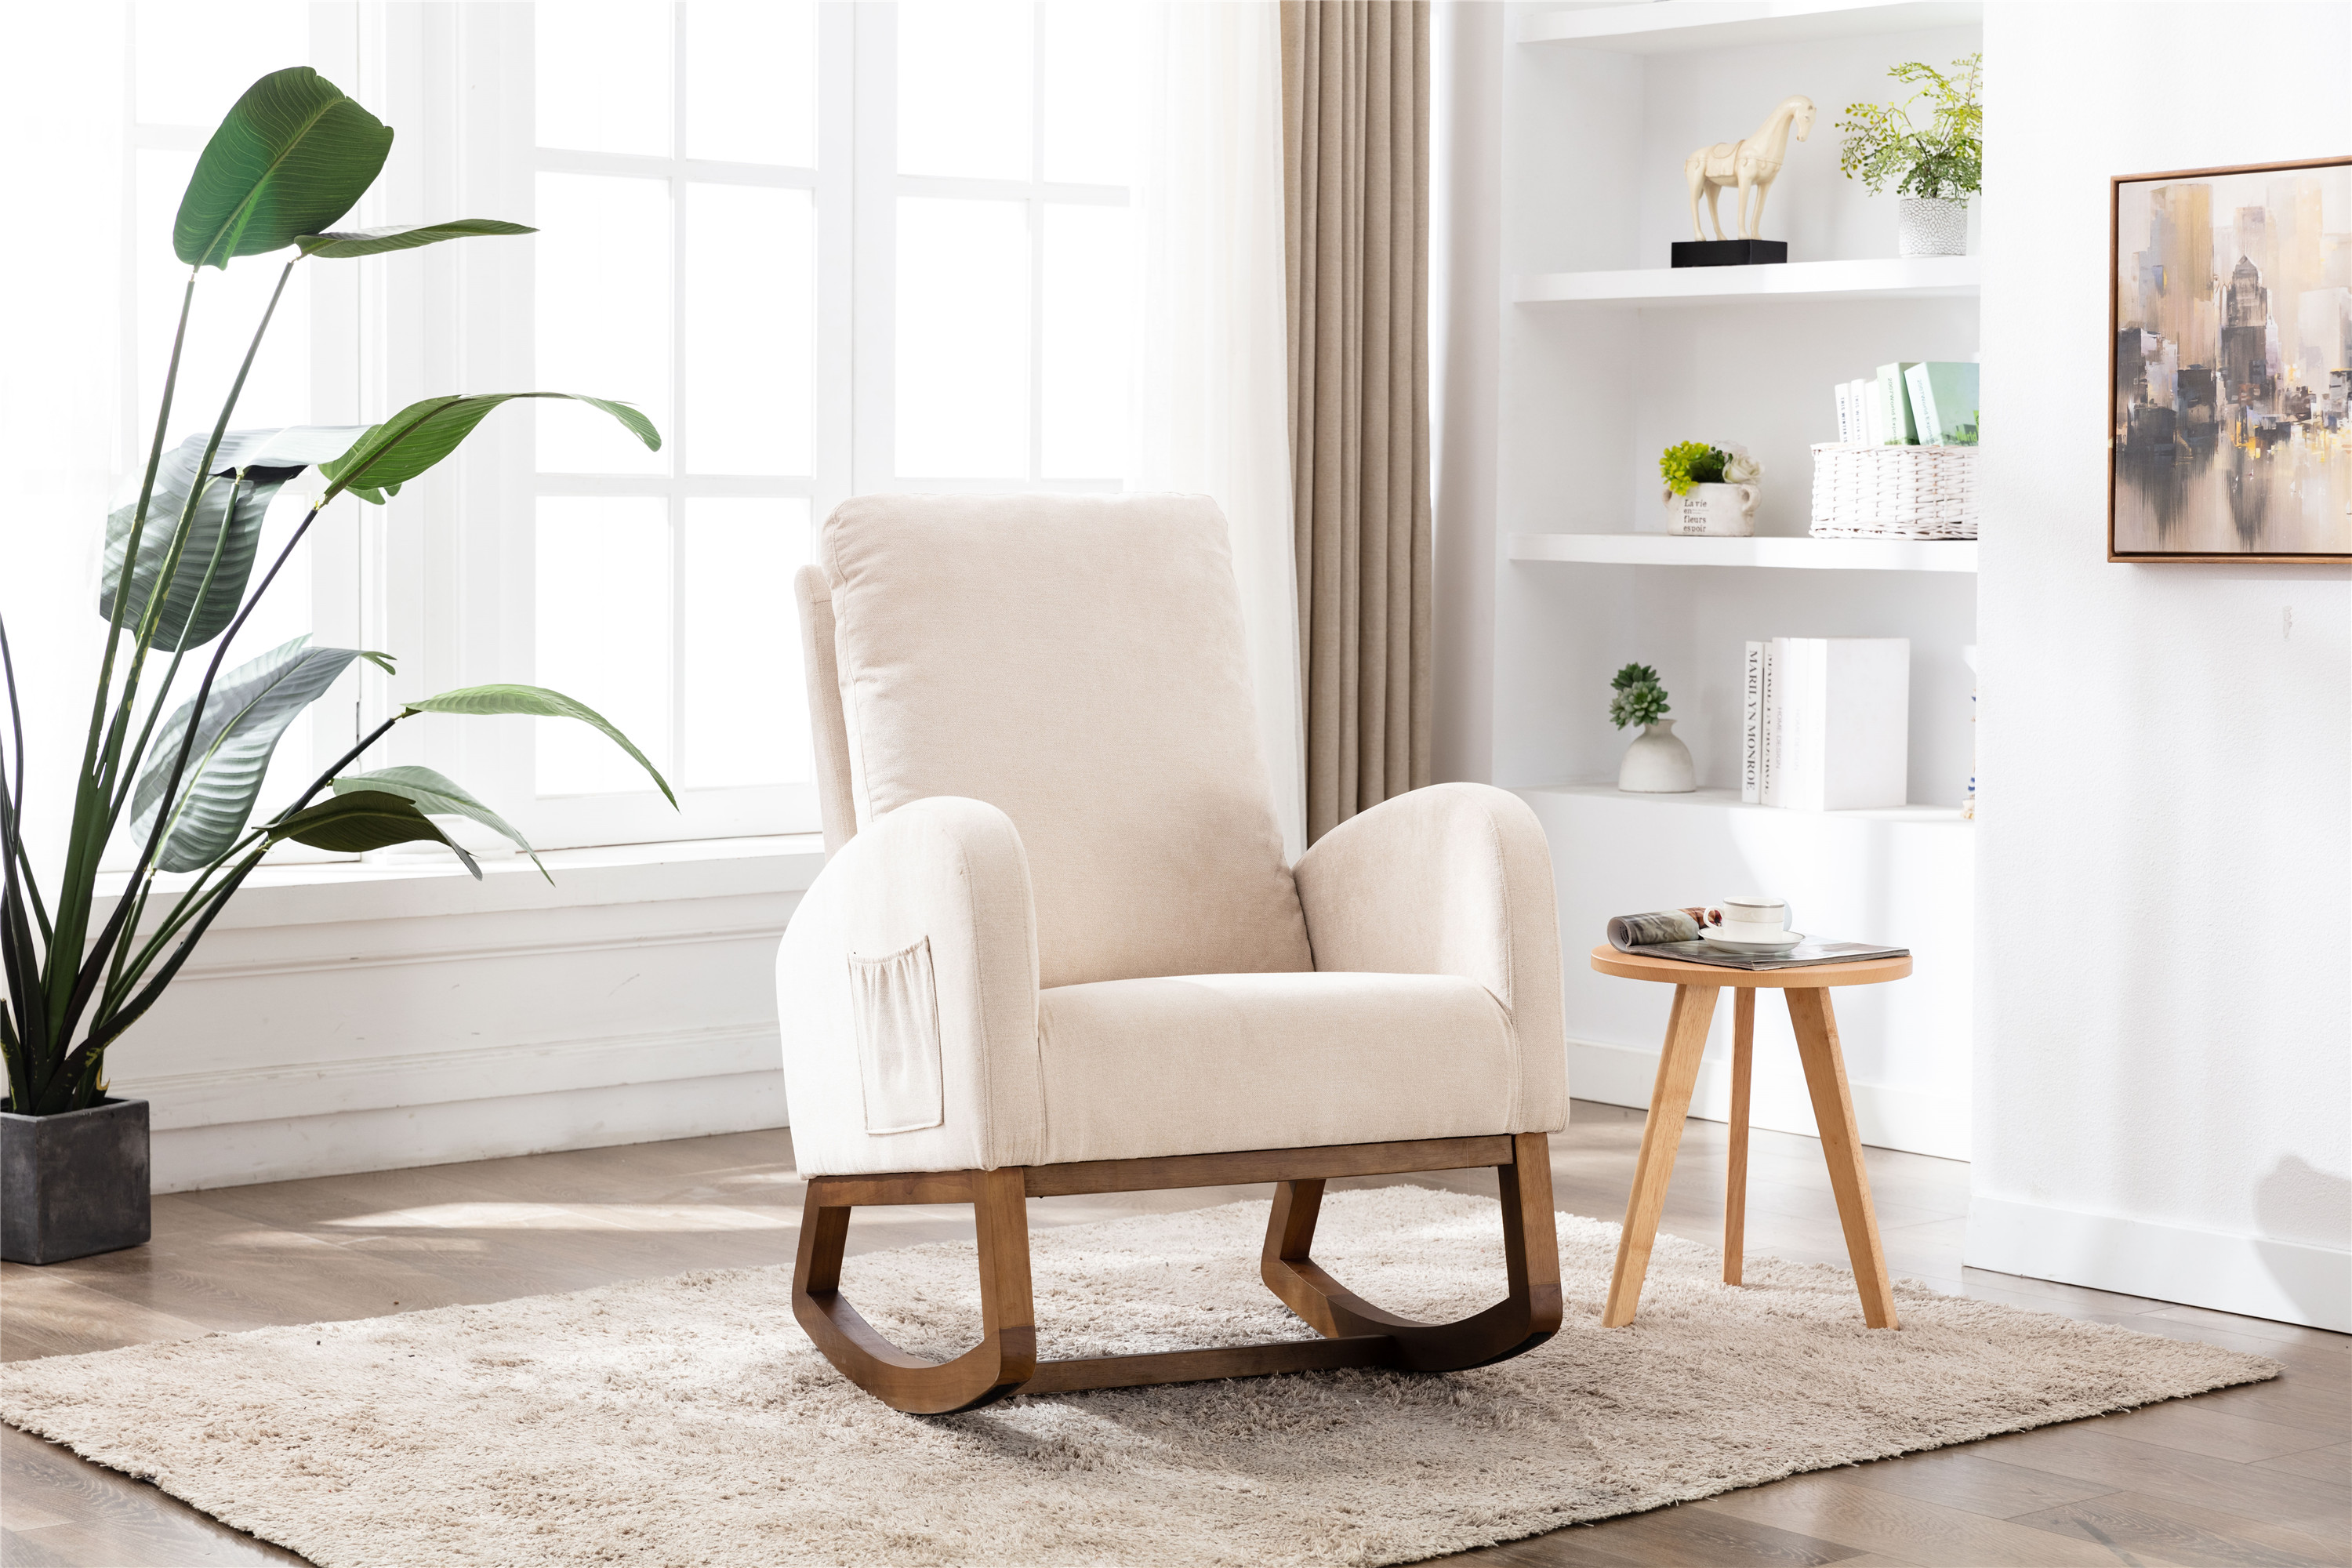 COOLMORE  living  room Comfortable  rocking chair  living room chair Beige-Boyel Living